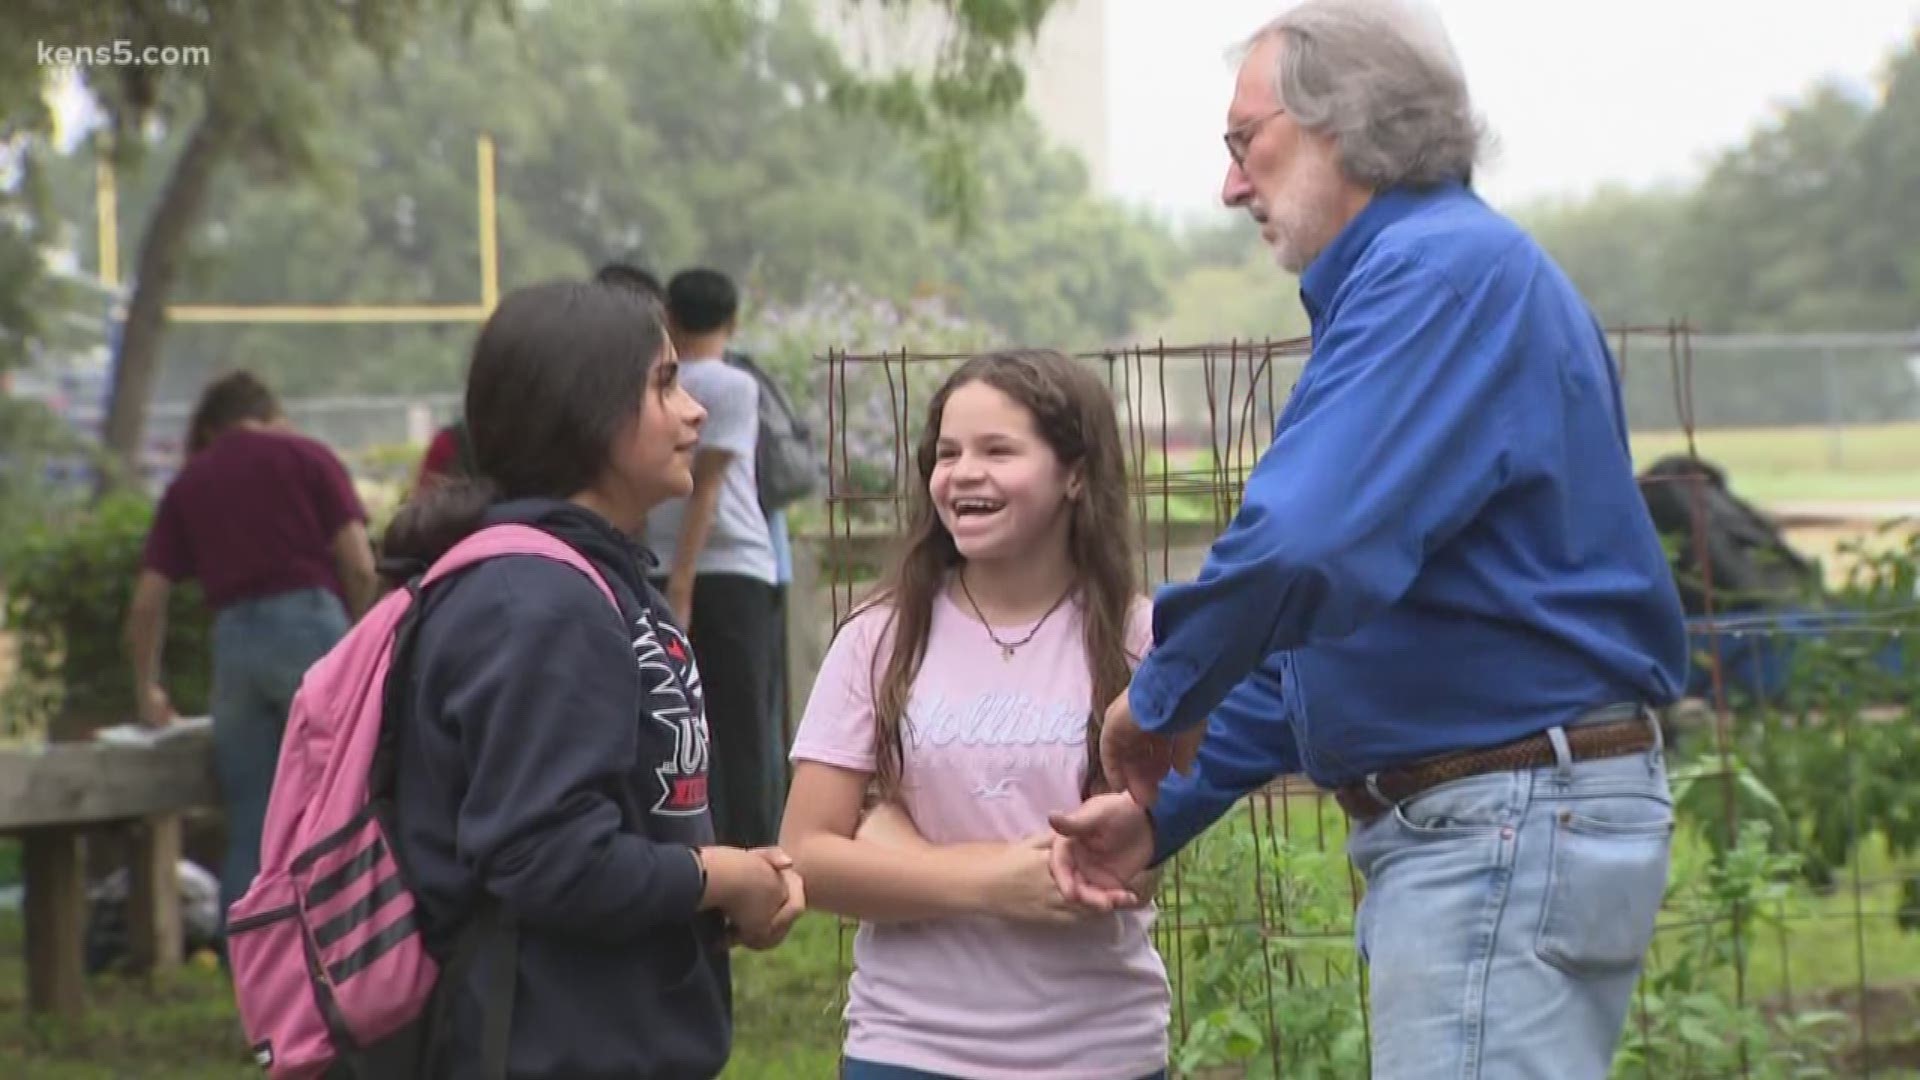 Students can learn math, history, and even compose poetry while planting carrots and broccoli. One dedicated science teacher made it happen. He's another one of the people who make San Antonio great!